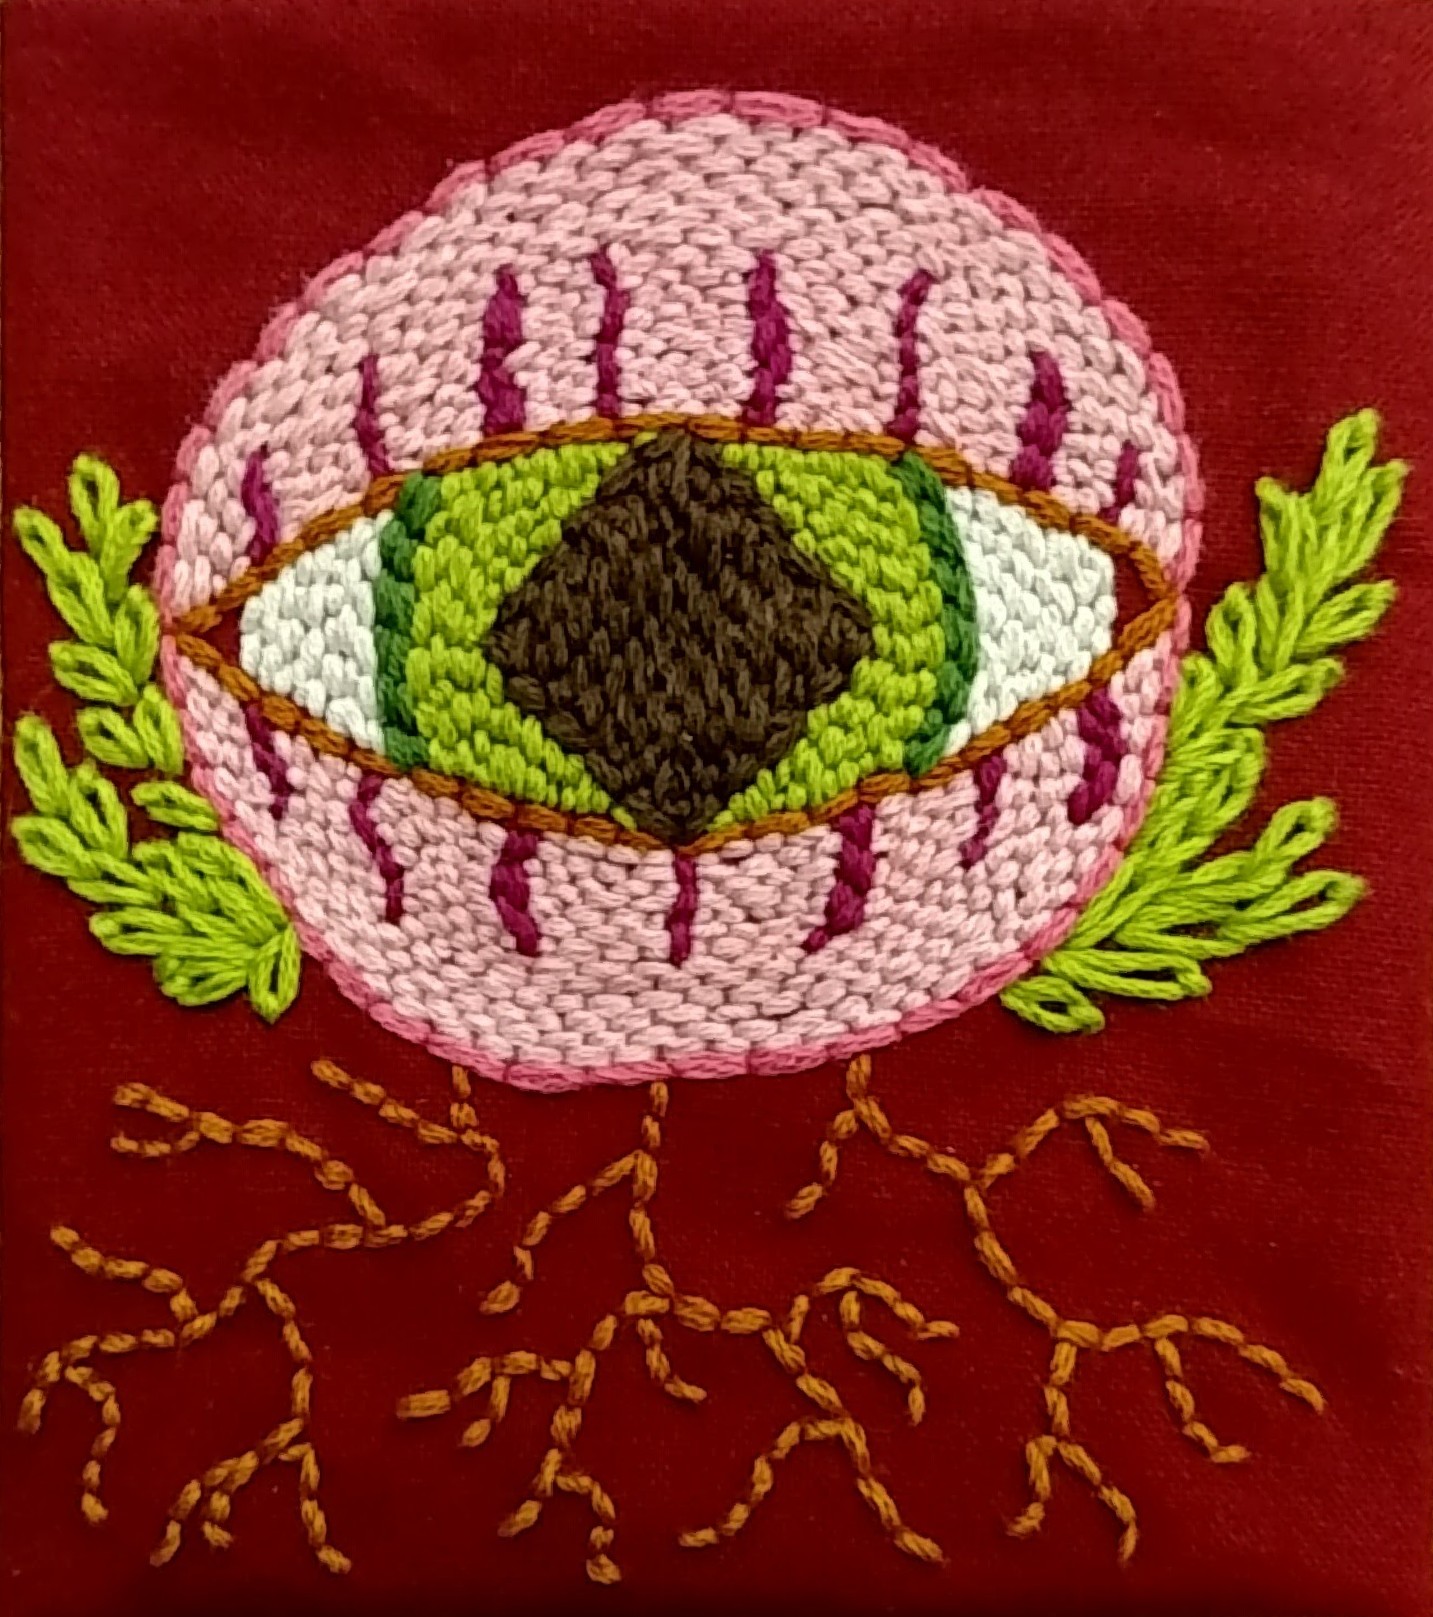 A big round eyeball with green eyes and a diamond pupil is staring straight at you, embroidered in a dense brick-like stitch pattern. Clusters of chain-stitch leaves and wandering back-stitch roots sprout from it.